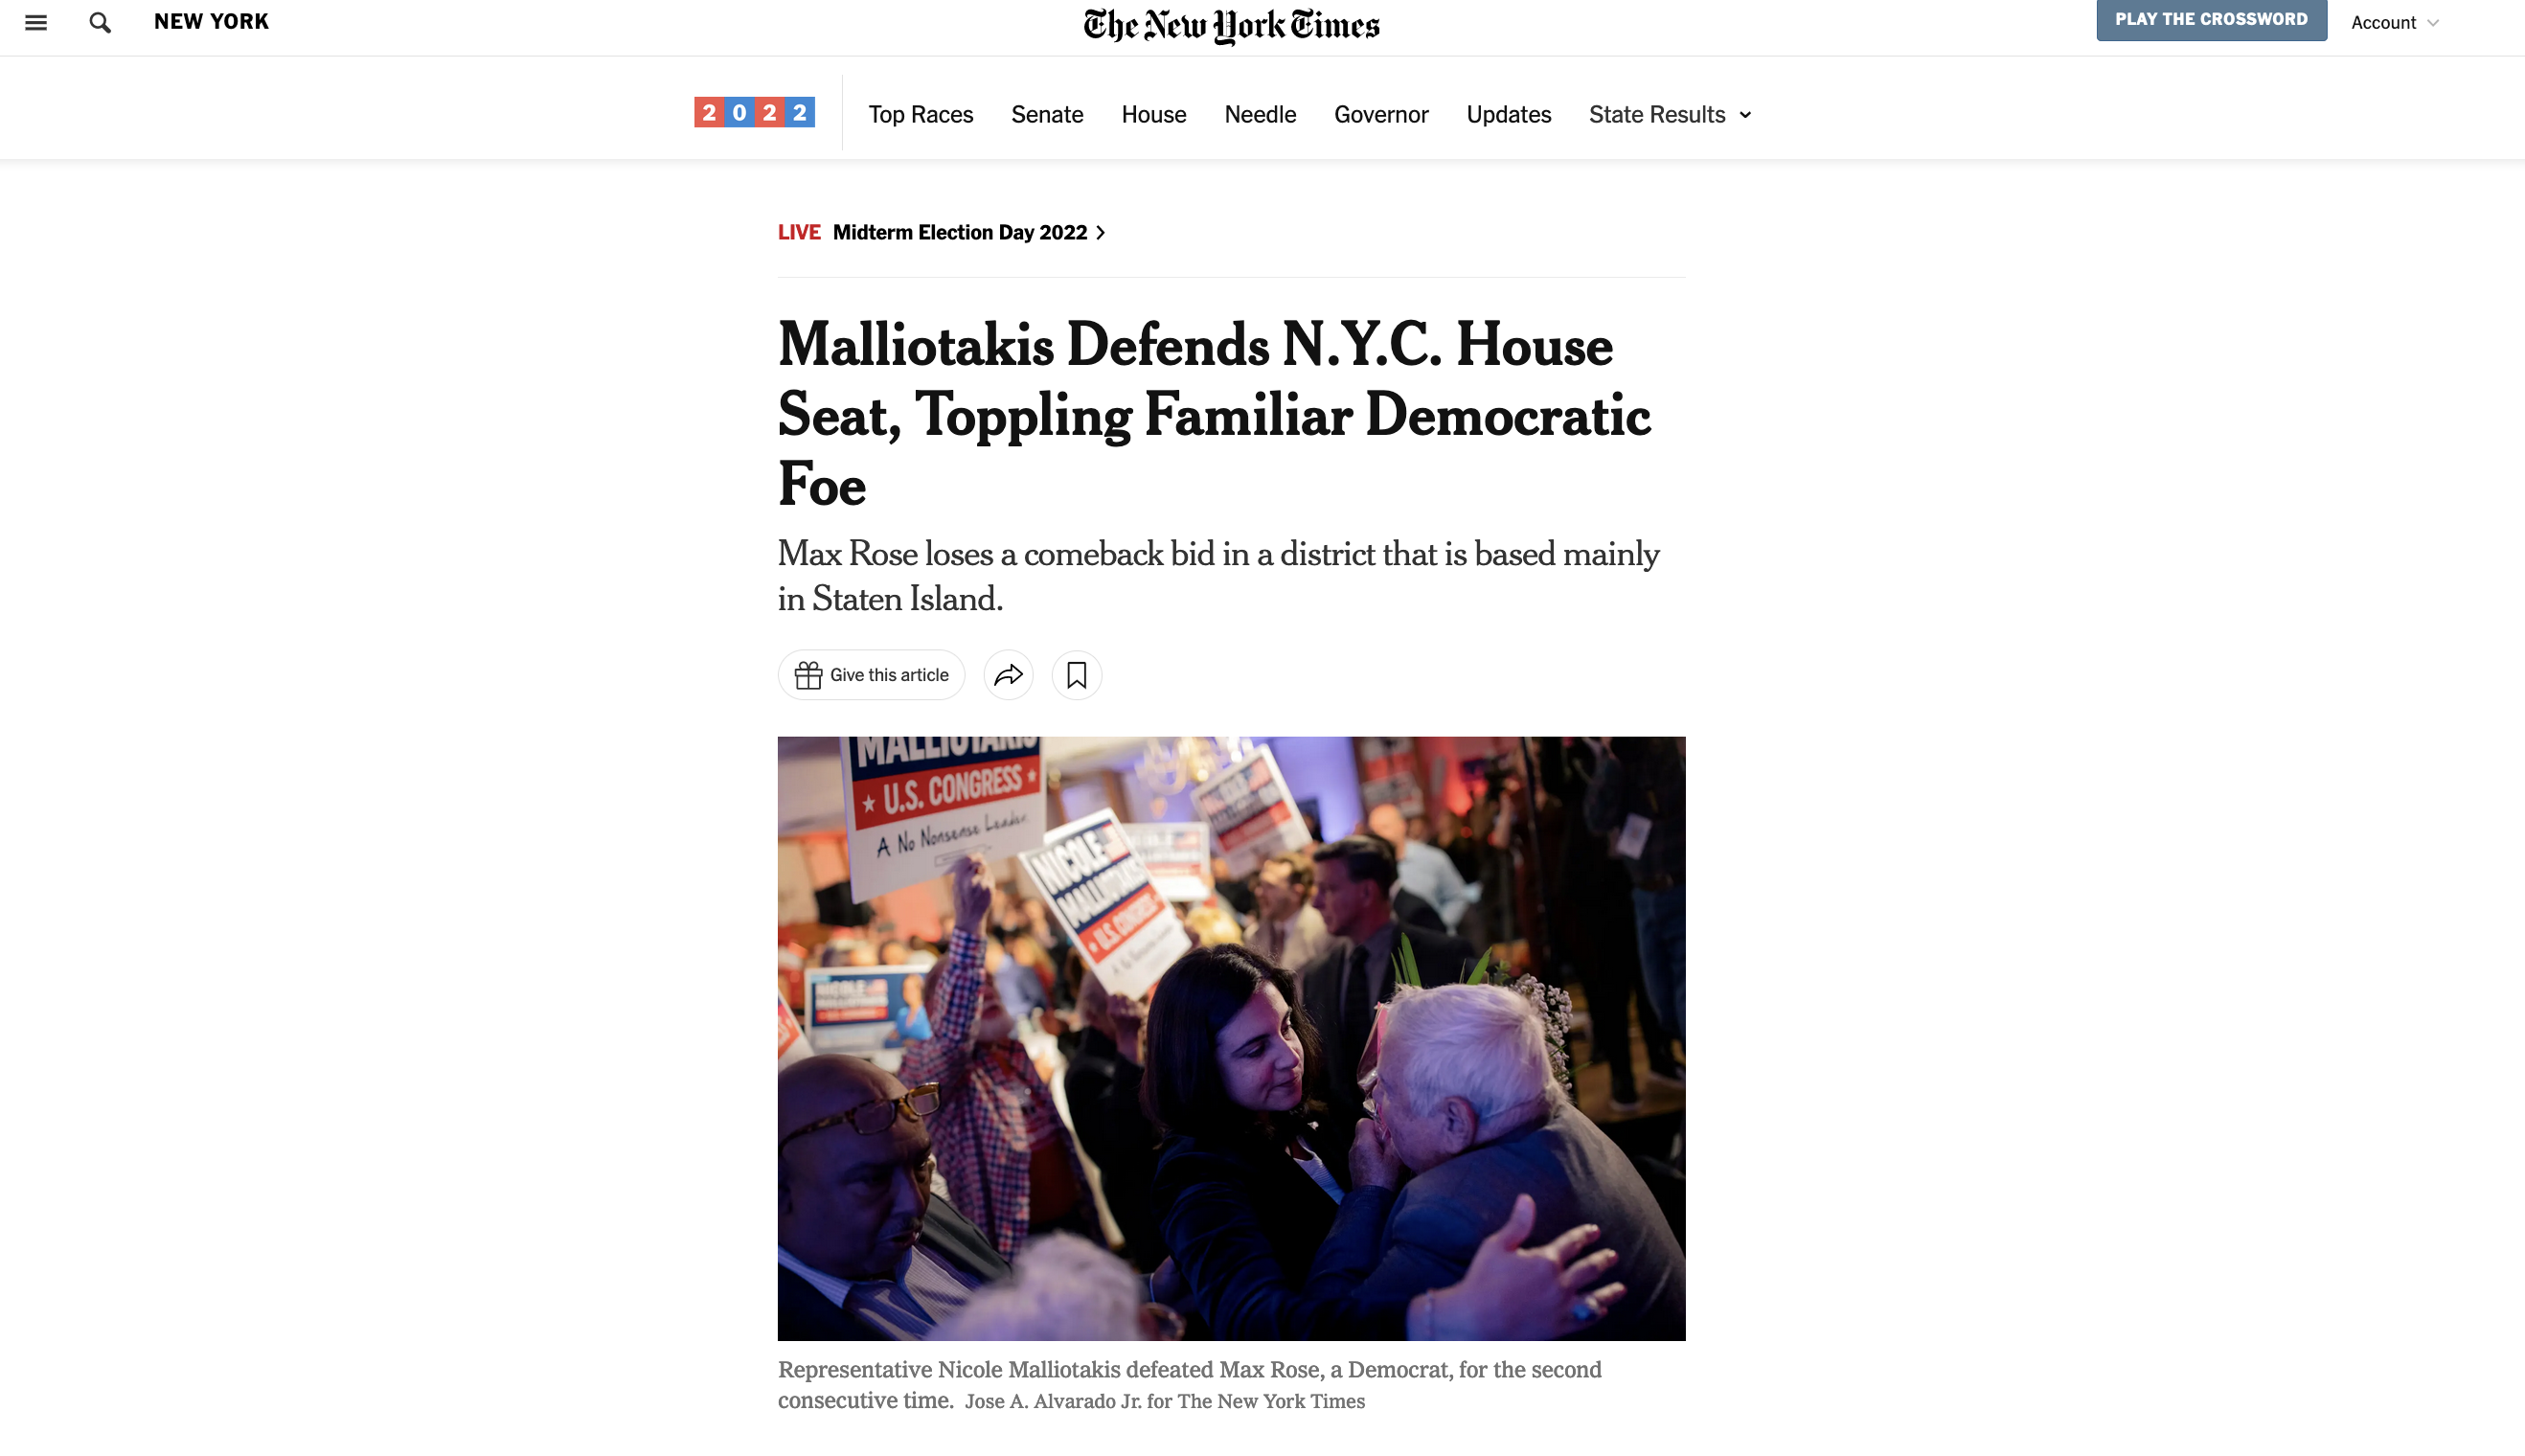 Thumbnail of for The New York Times: Malliotakis Defends N.Y.C. House Seat, Toppling Familiar Democratic Foe